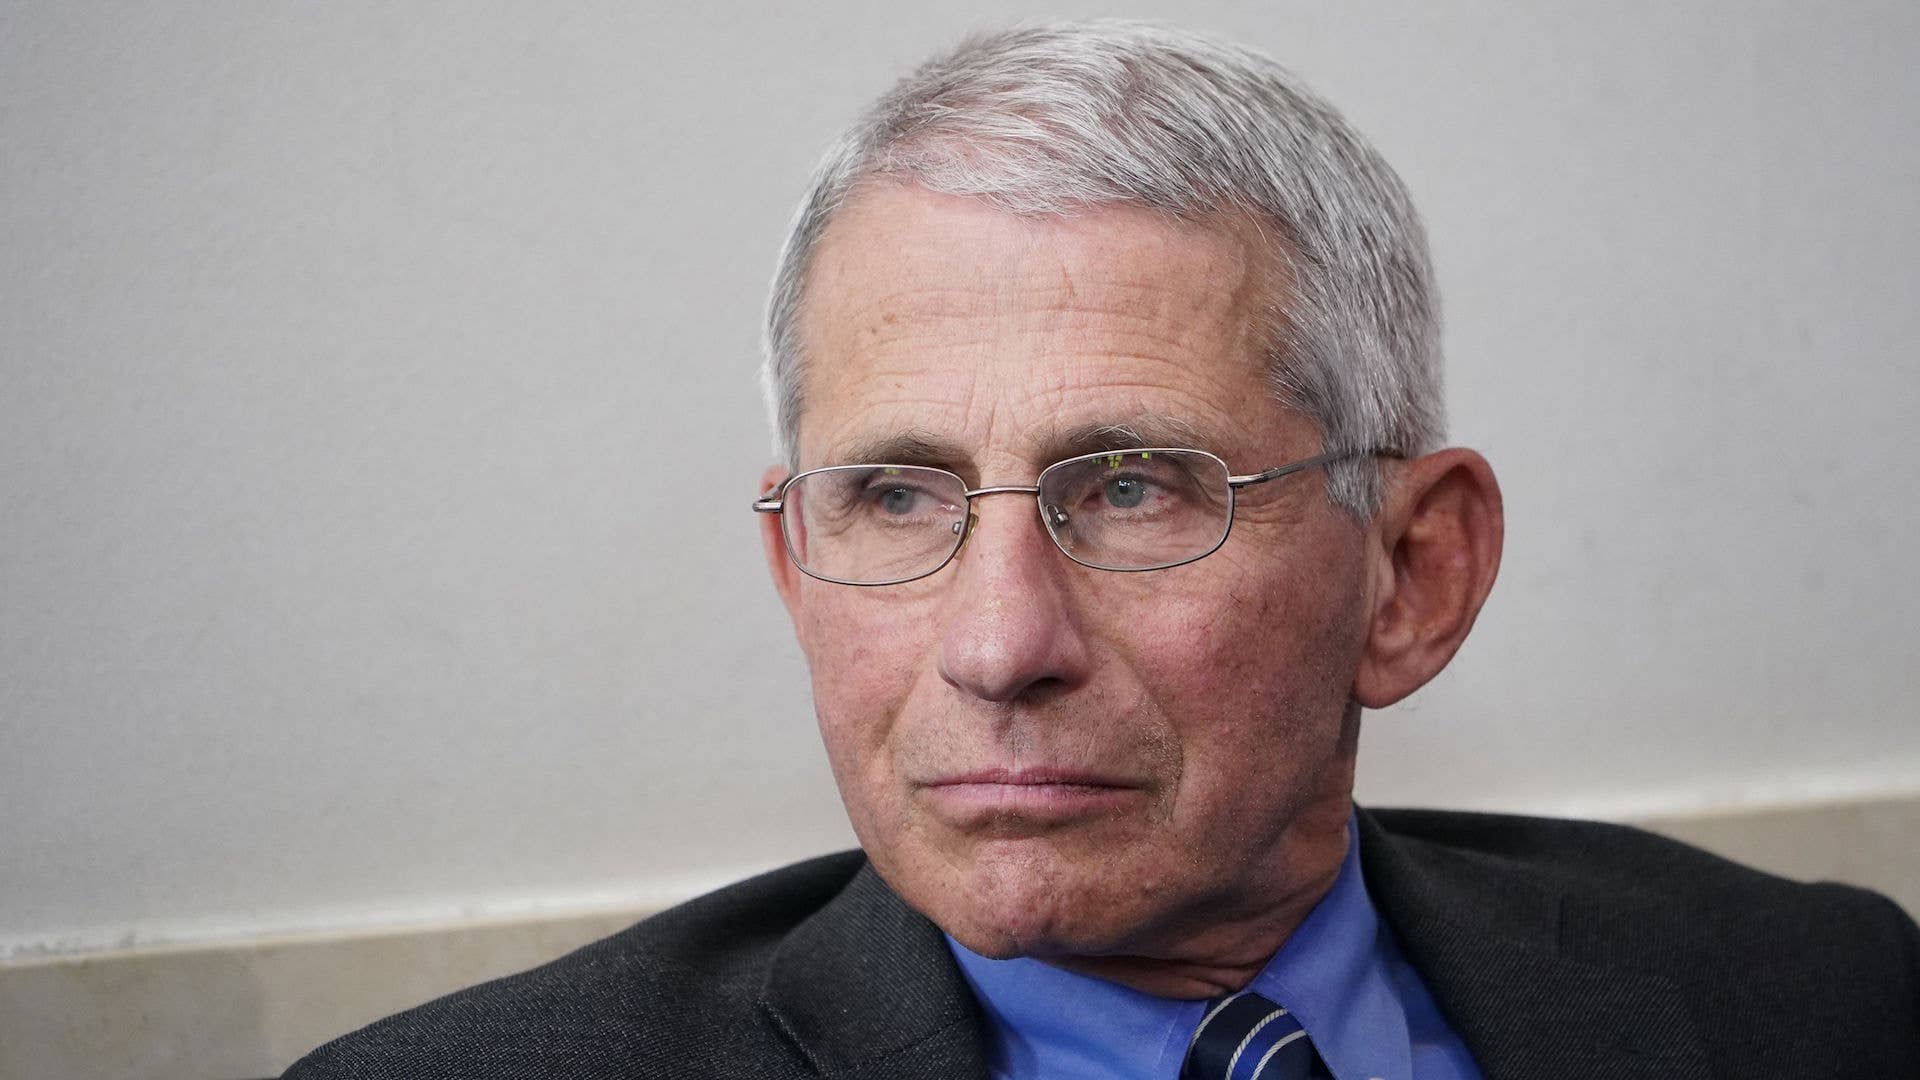 Anthony Fauci listens during the daily briefing on COVID 19 in the Brady Briefing Room.